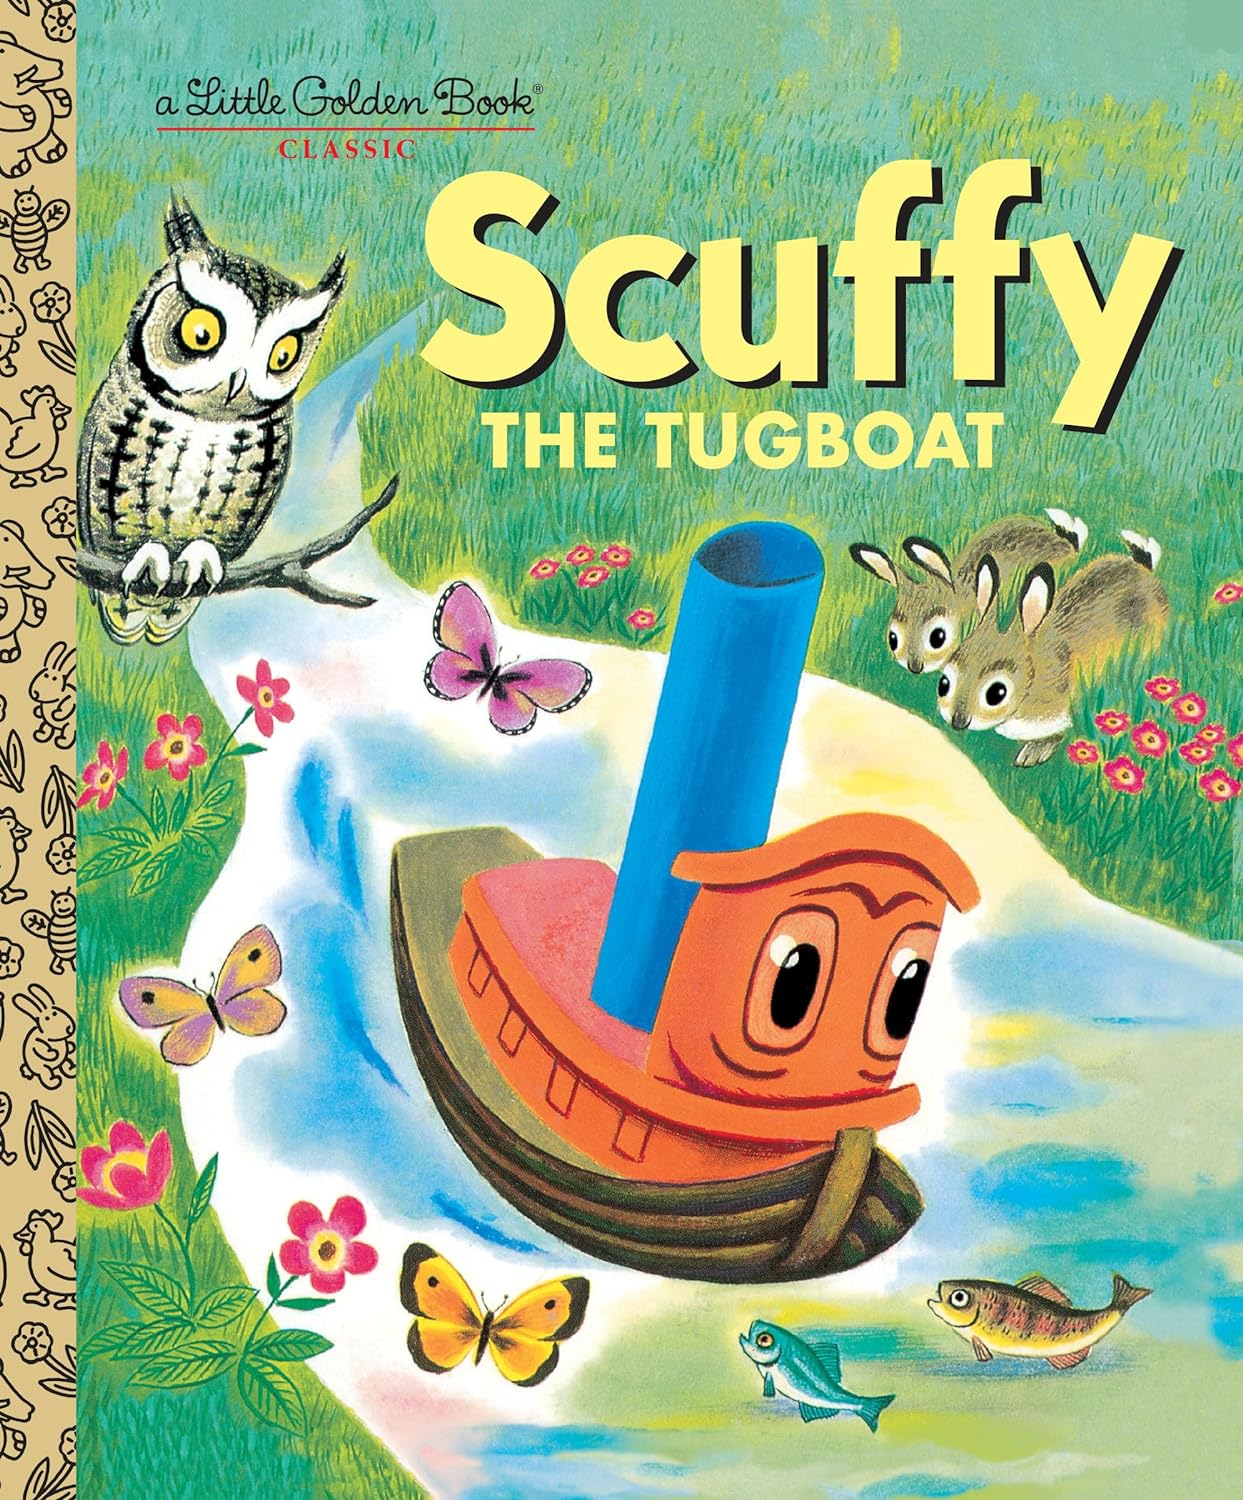 Scuffy the Tugboat and His Adventures Down the River Little Golden Book